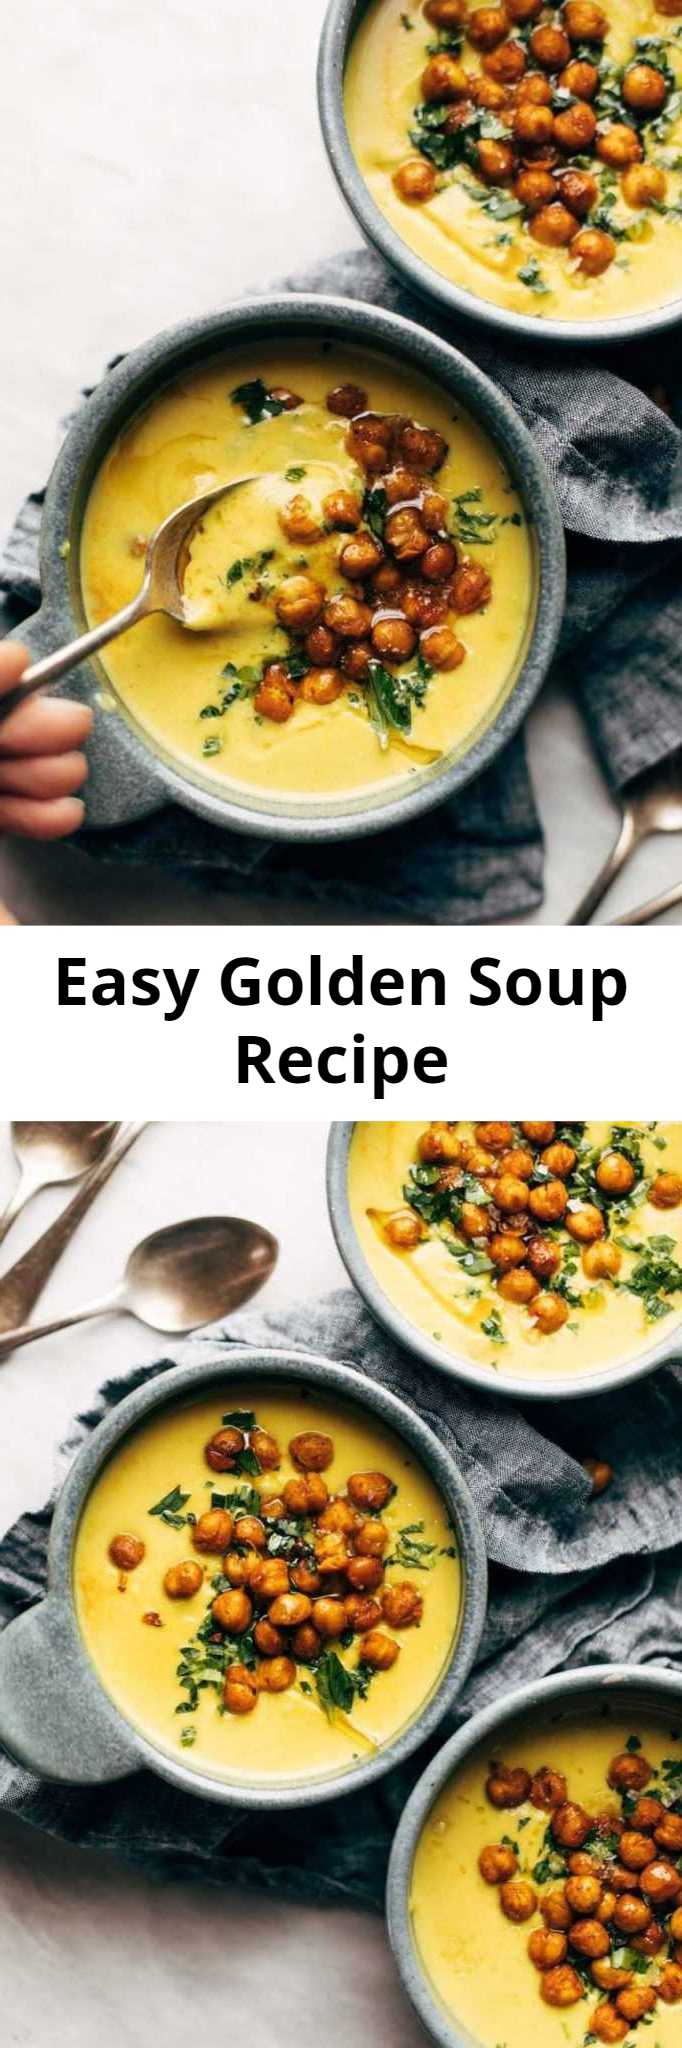 Easy Golden Soup Recipe - Cozy, bright, and healing with power-foods like turmeric, cauliflower, and cashews. Topped with crispy chickpeas. Super creamy and SO GOOD. #healthy #sugarfree #glutenfree #vegan #cleaneating #easyrecipe #soup